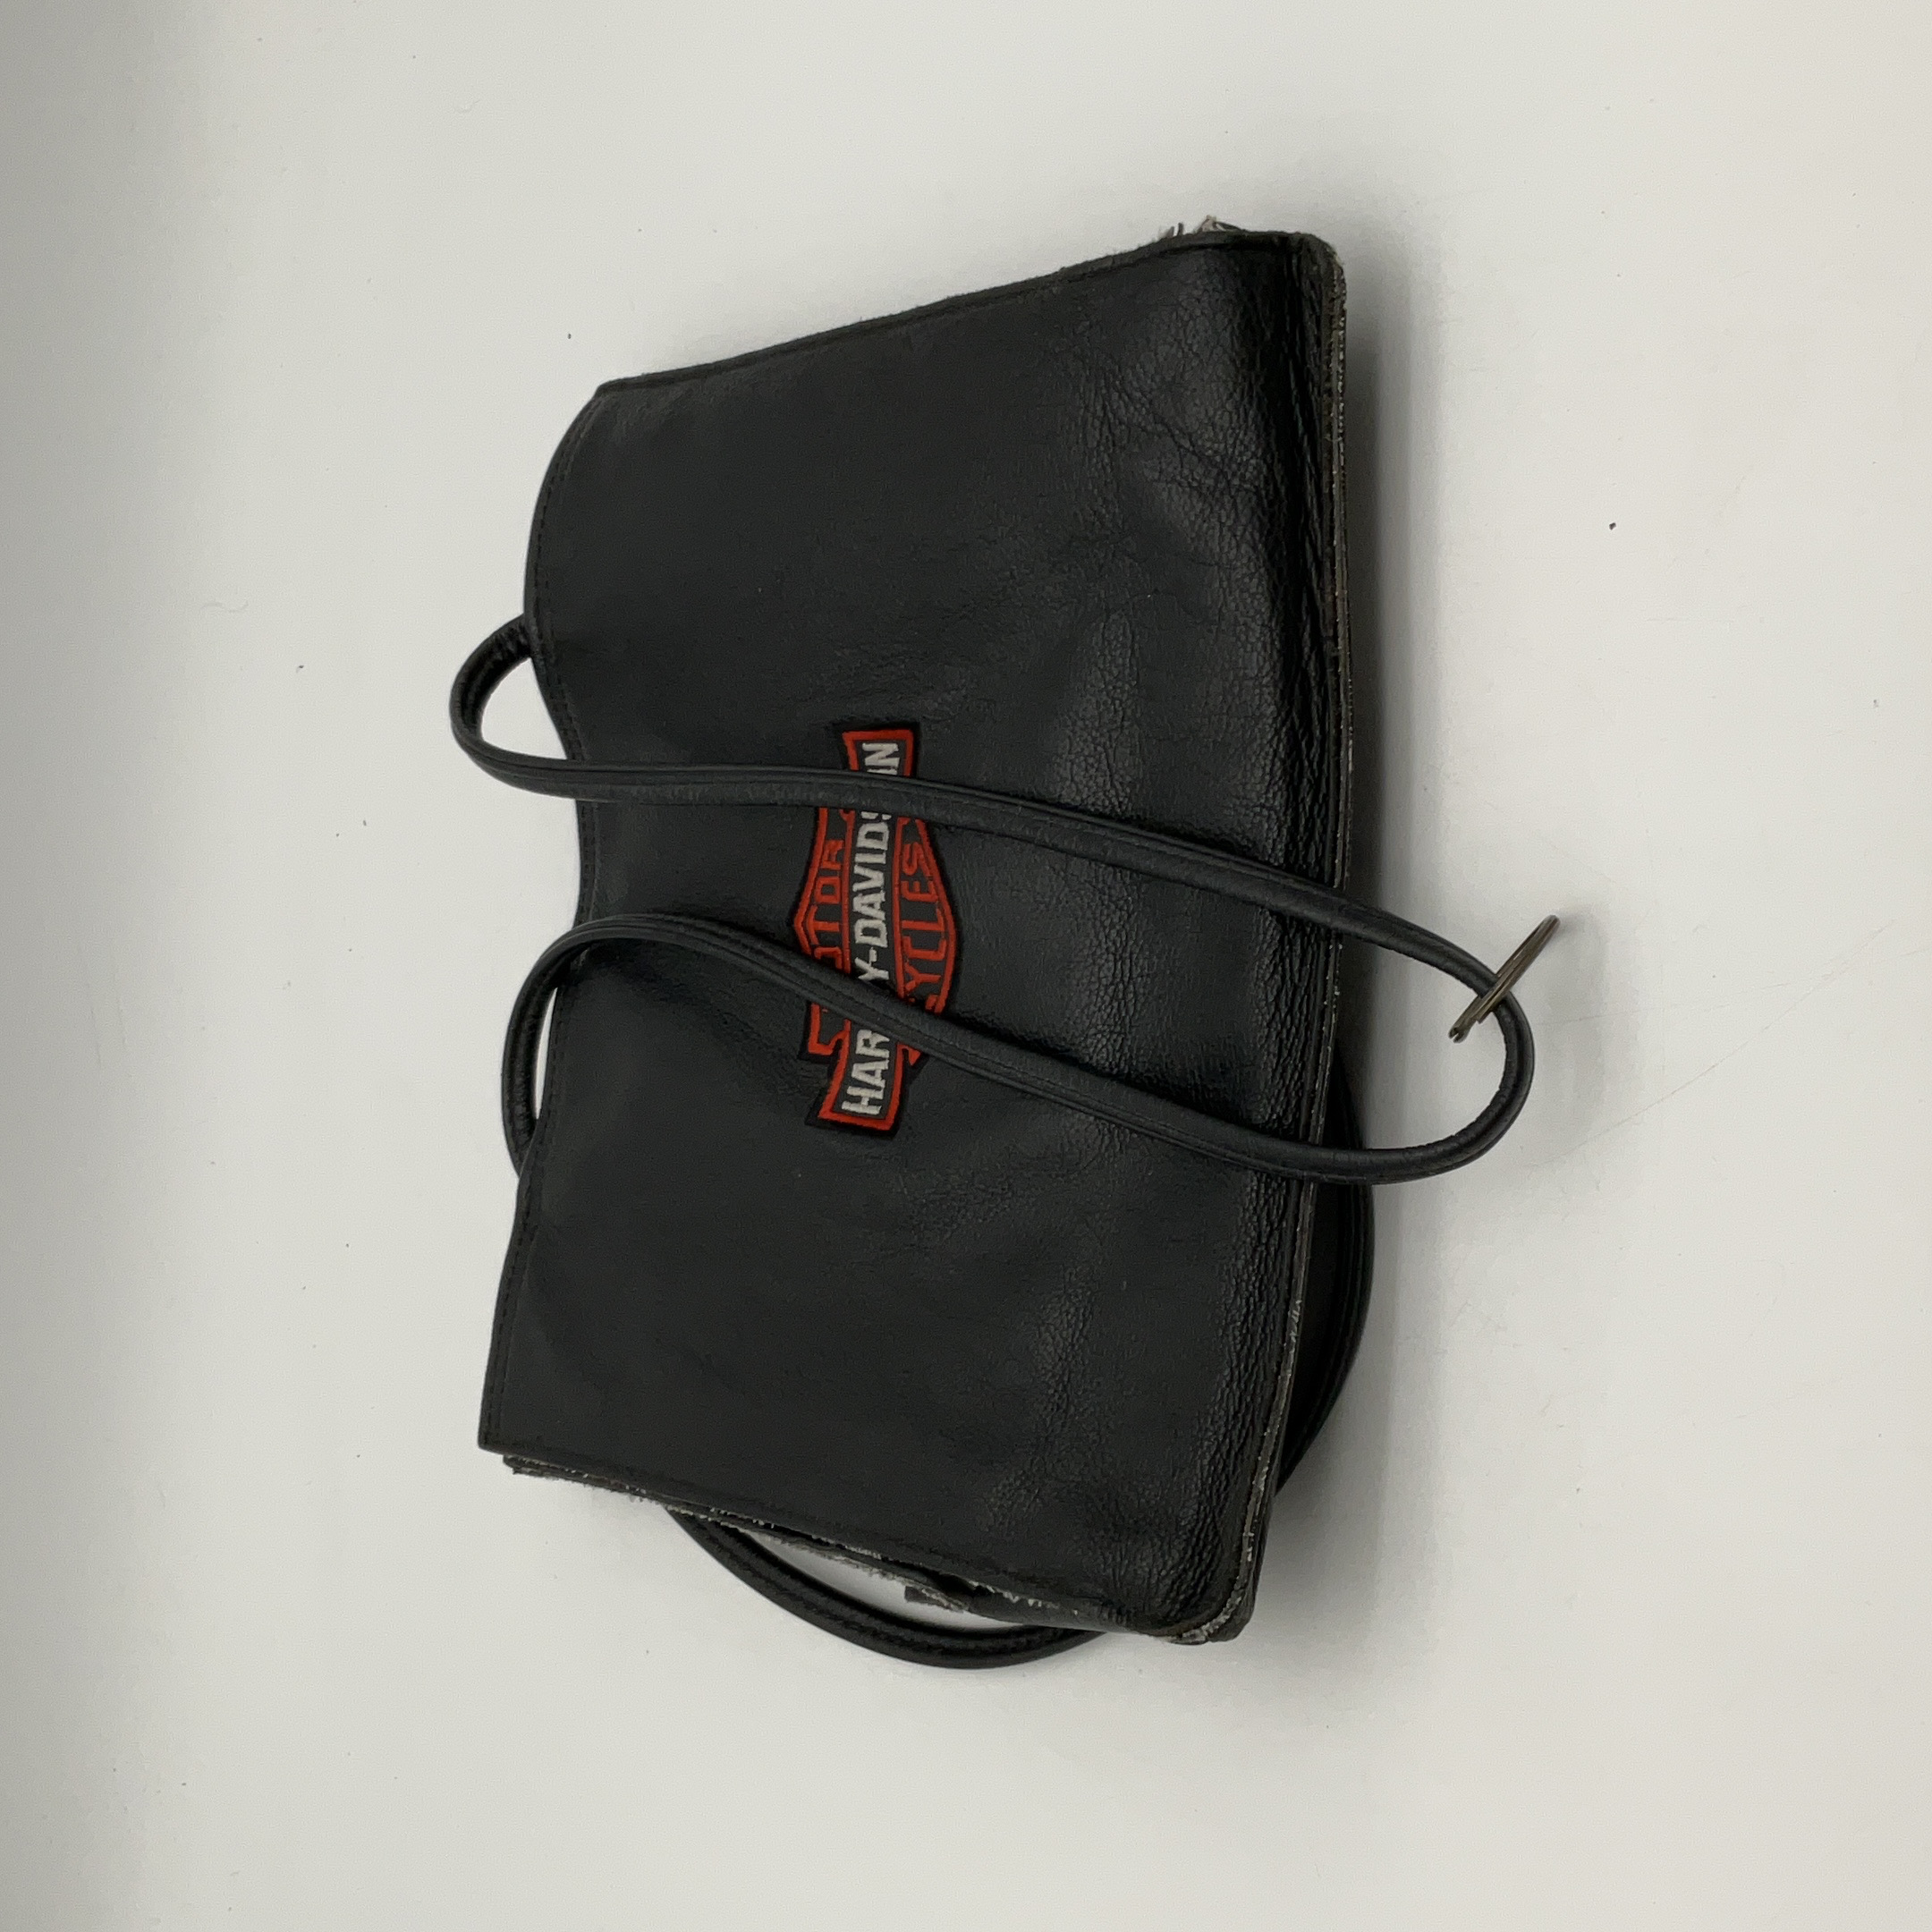 Harley-Davidson Leather Tote Bags